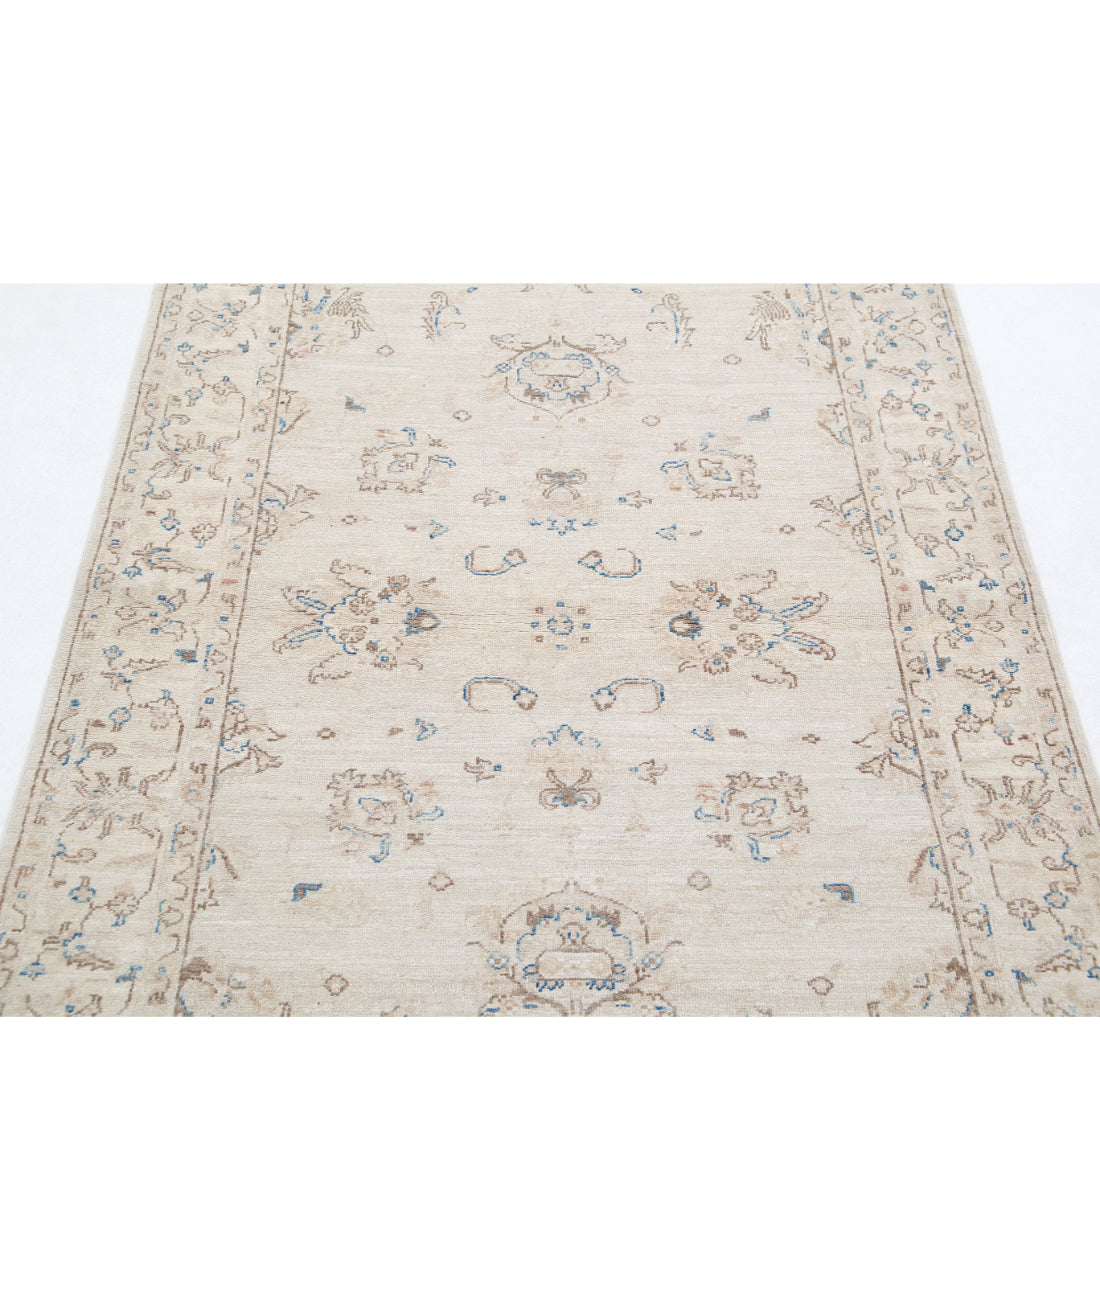 Hand Knotted Serenity Wool Rug - 3'10'' x 5'9'' 3'10'' x 5'9'' (115 X 173) / Grey / Ivory